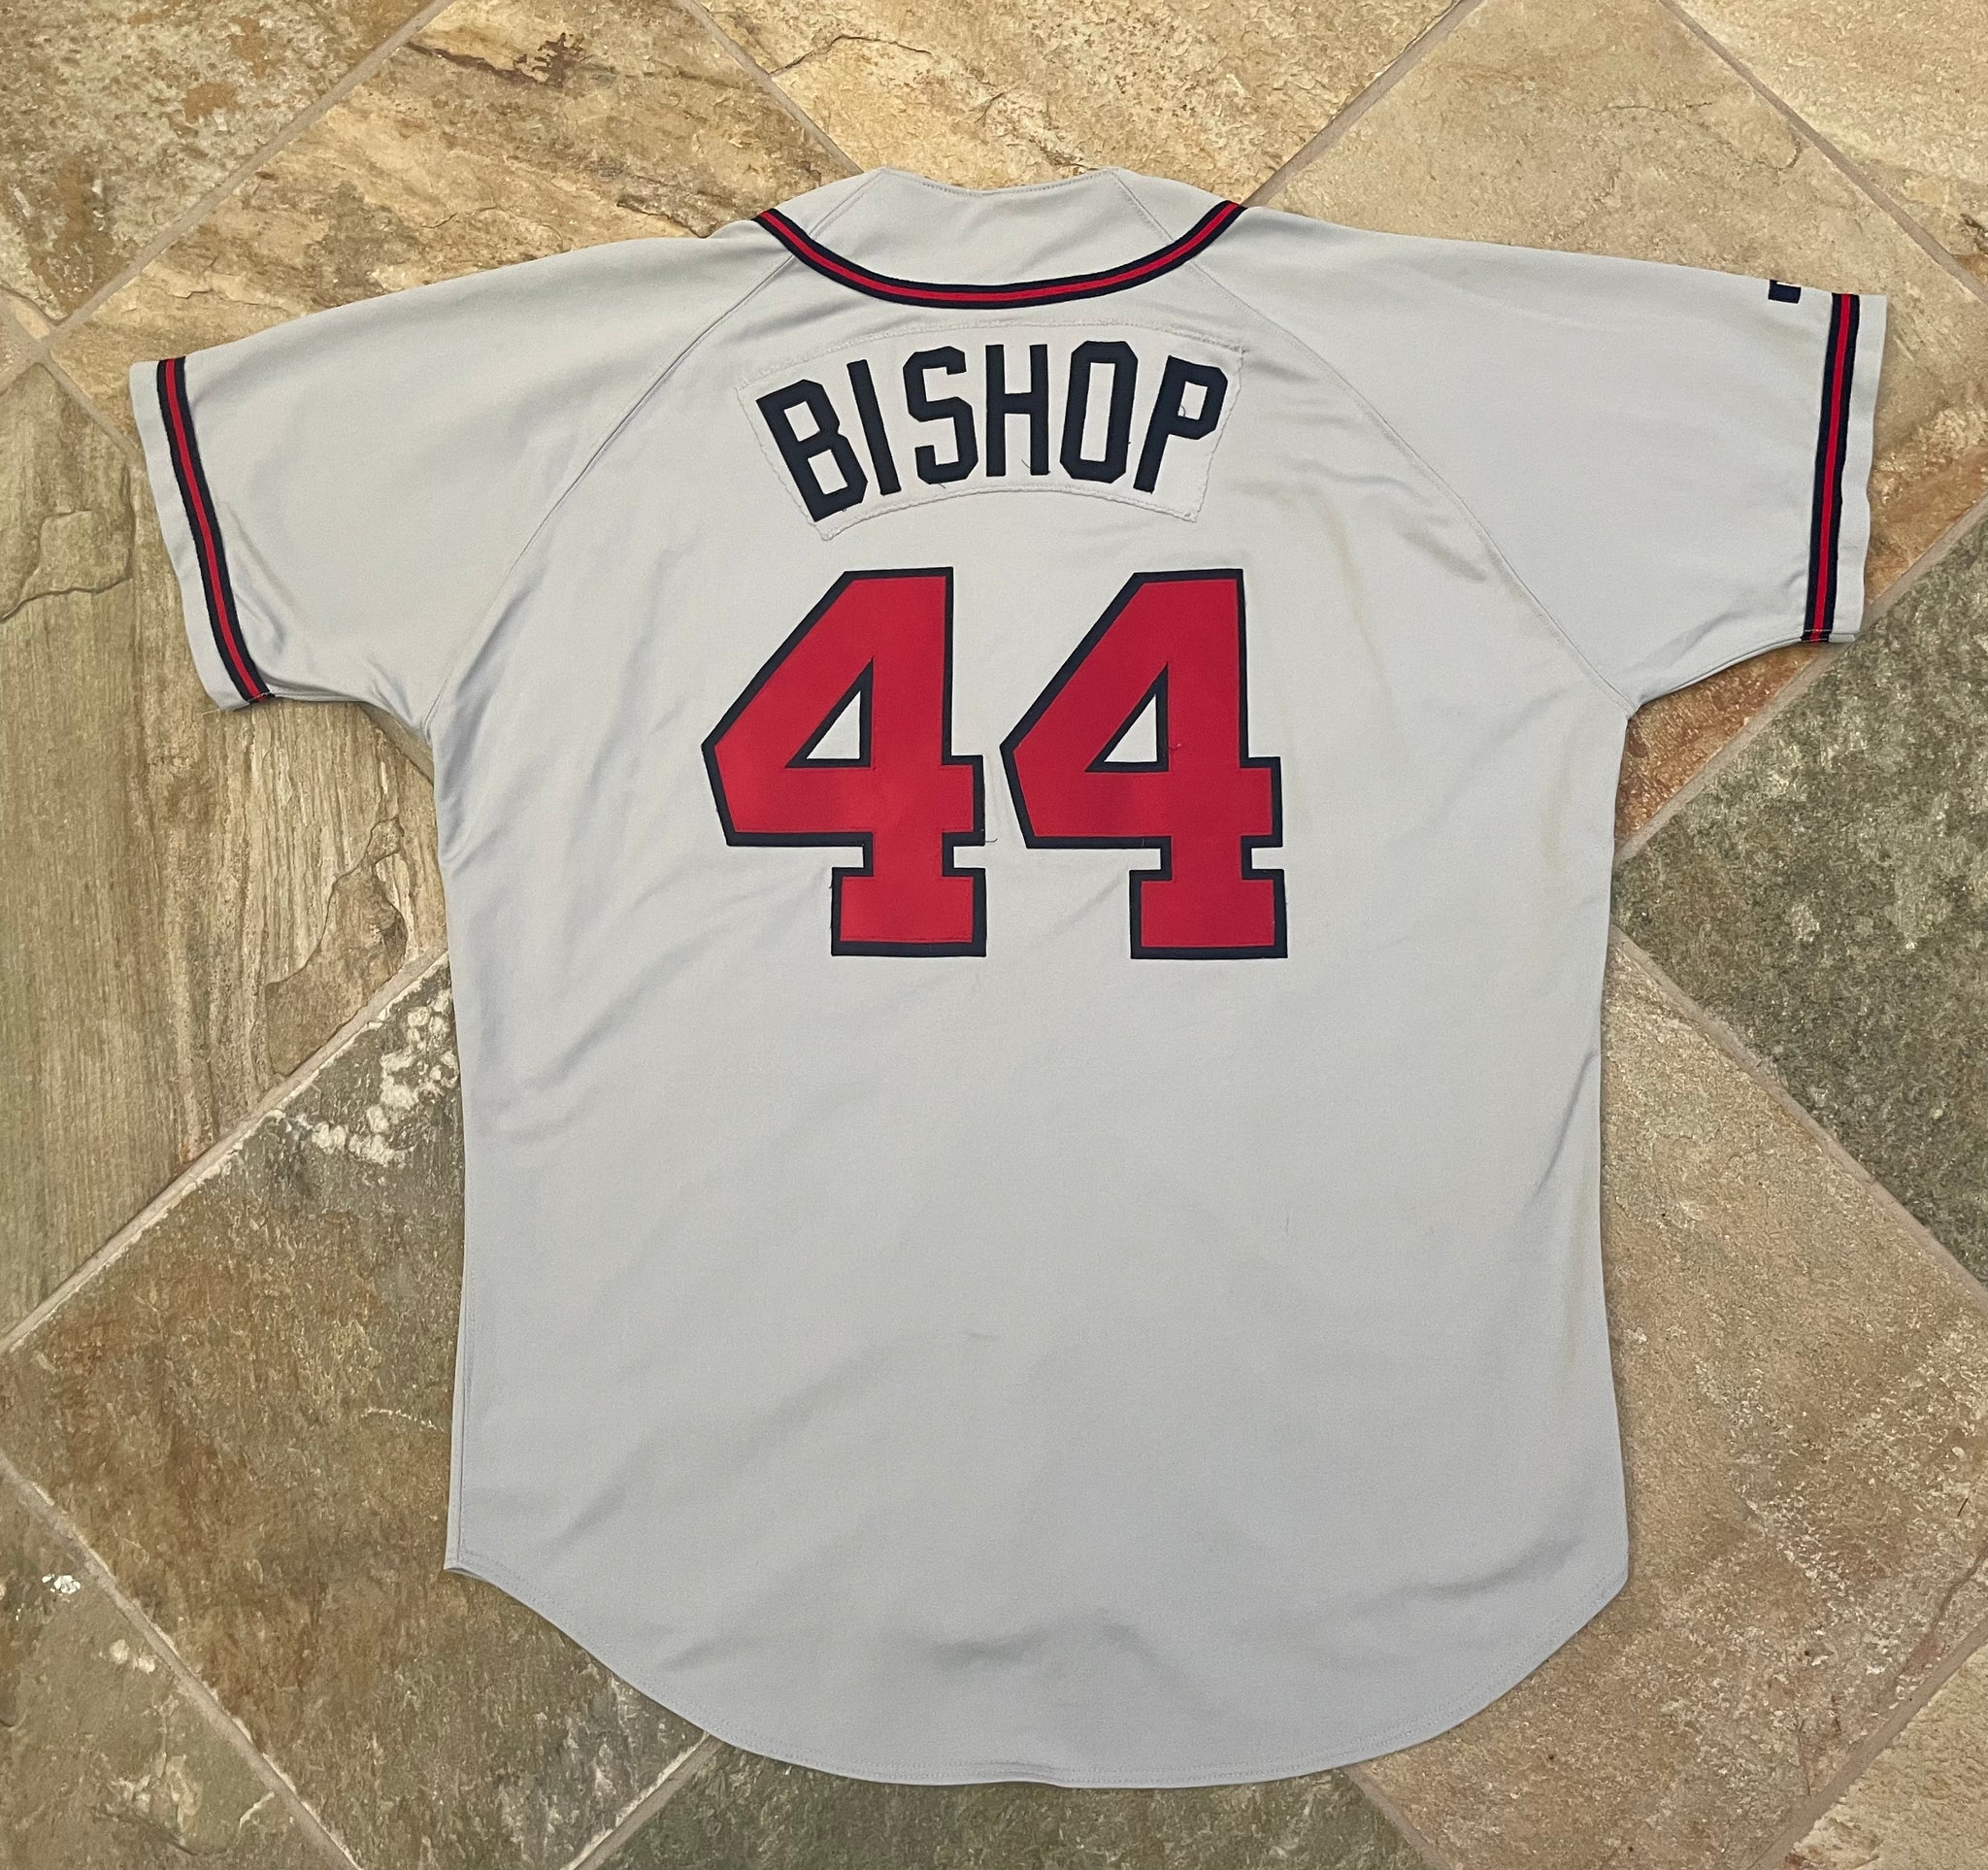 Rare Vintage Authentic mid 1990s ATLANTA BRAVES jersey - RUSSELL